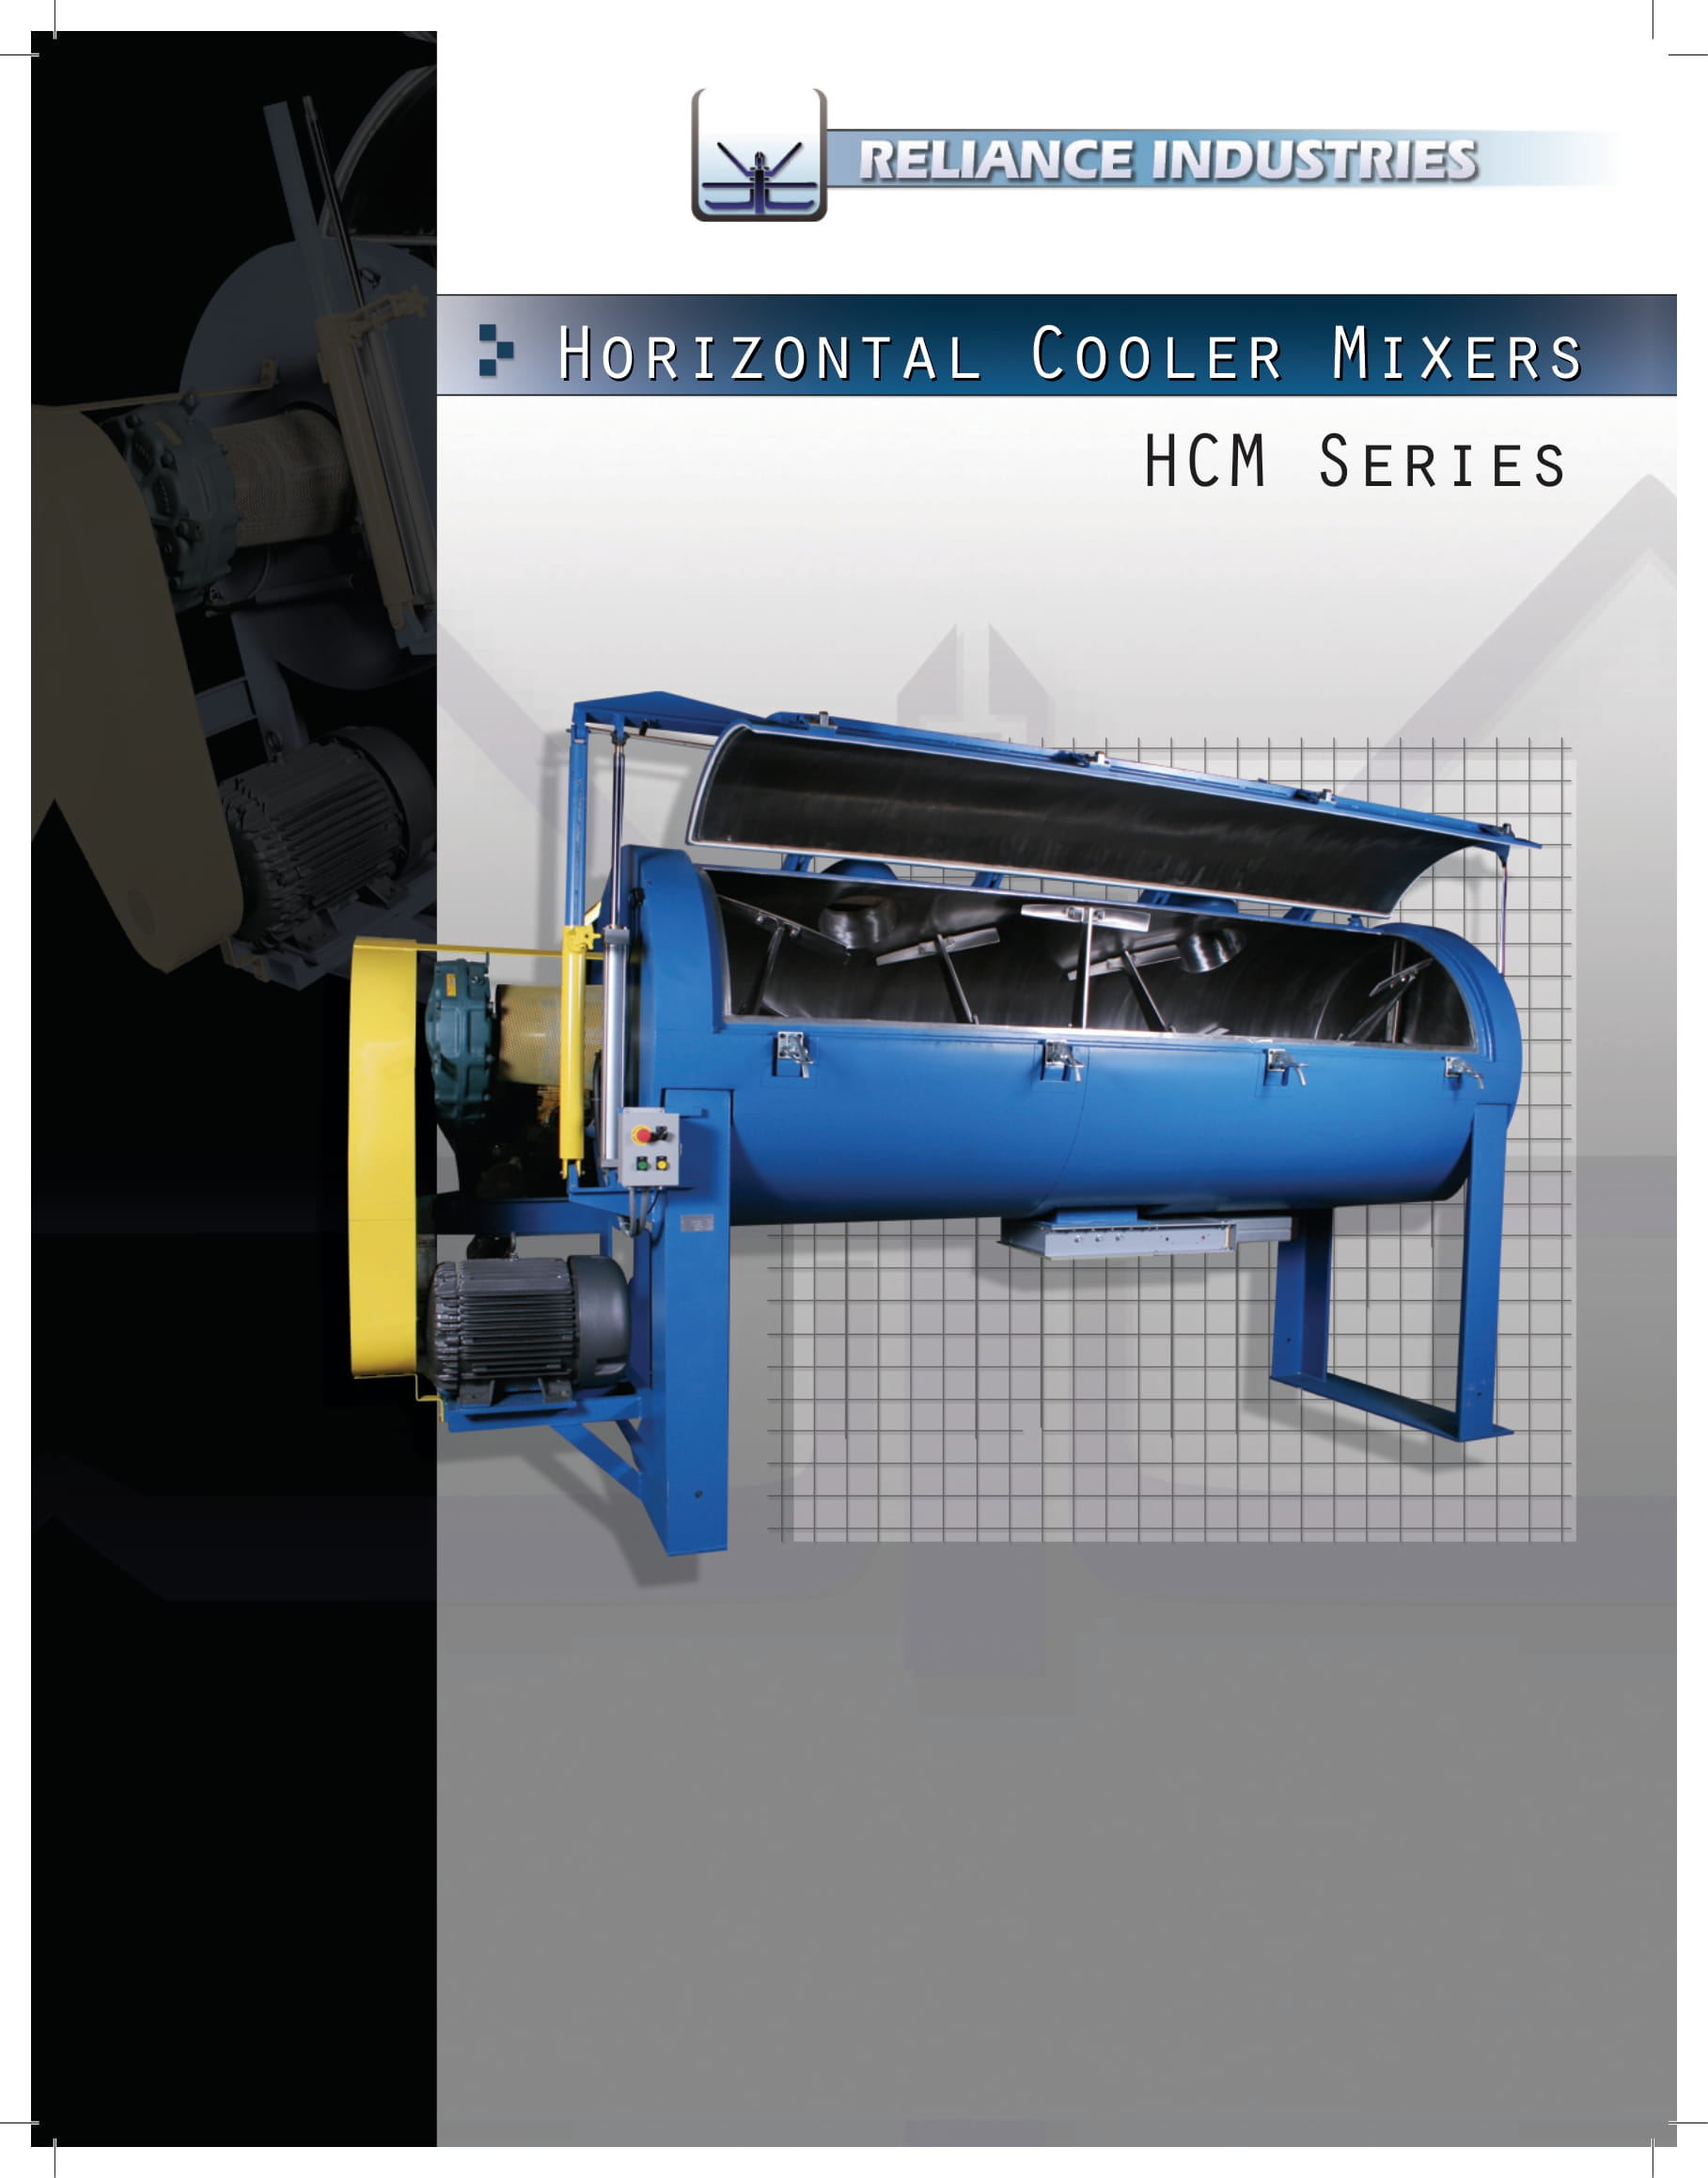 Horizontal Cooling Mixers of Reliance